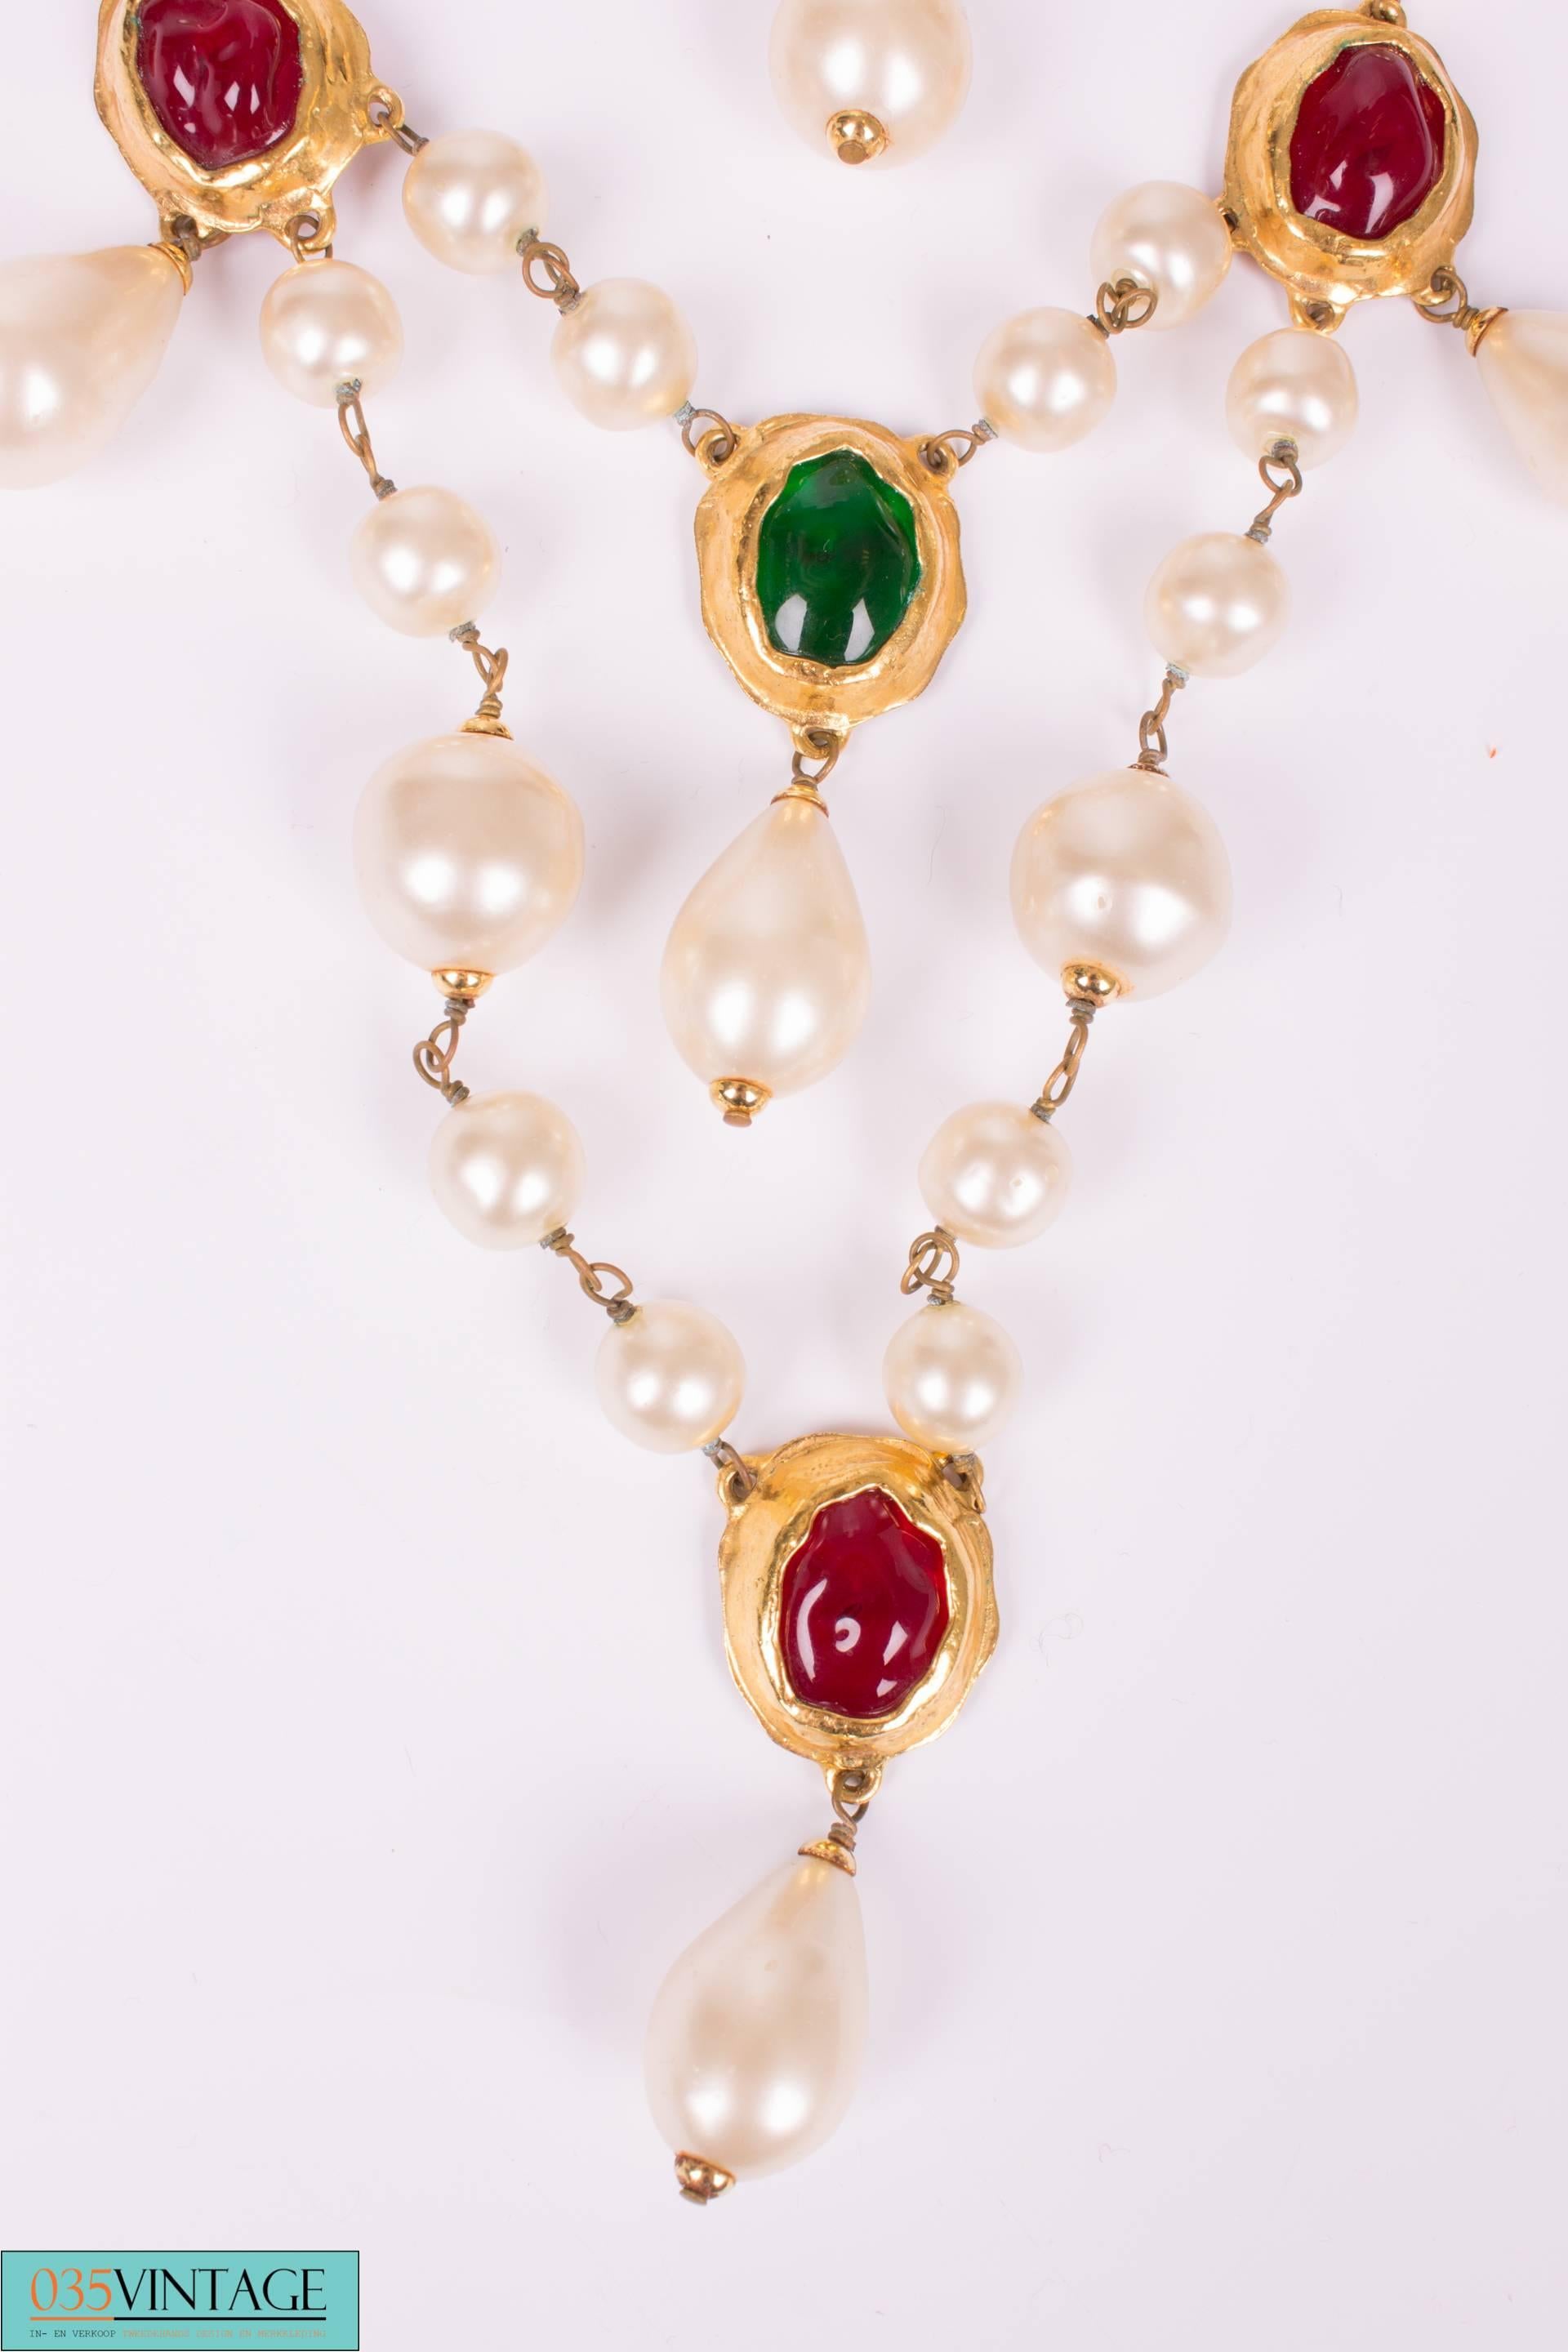 A vintage 80's necklace by Chanel, you can't deny this much beauty!

The necklace has three layers and is mainly crafted of faux pearls in different shapes and sizes. Some gripoix beads with a golden brim have been added in red, green and blue.